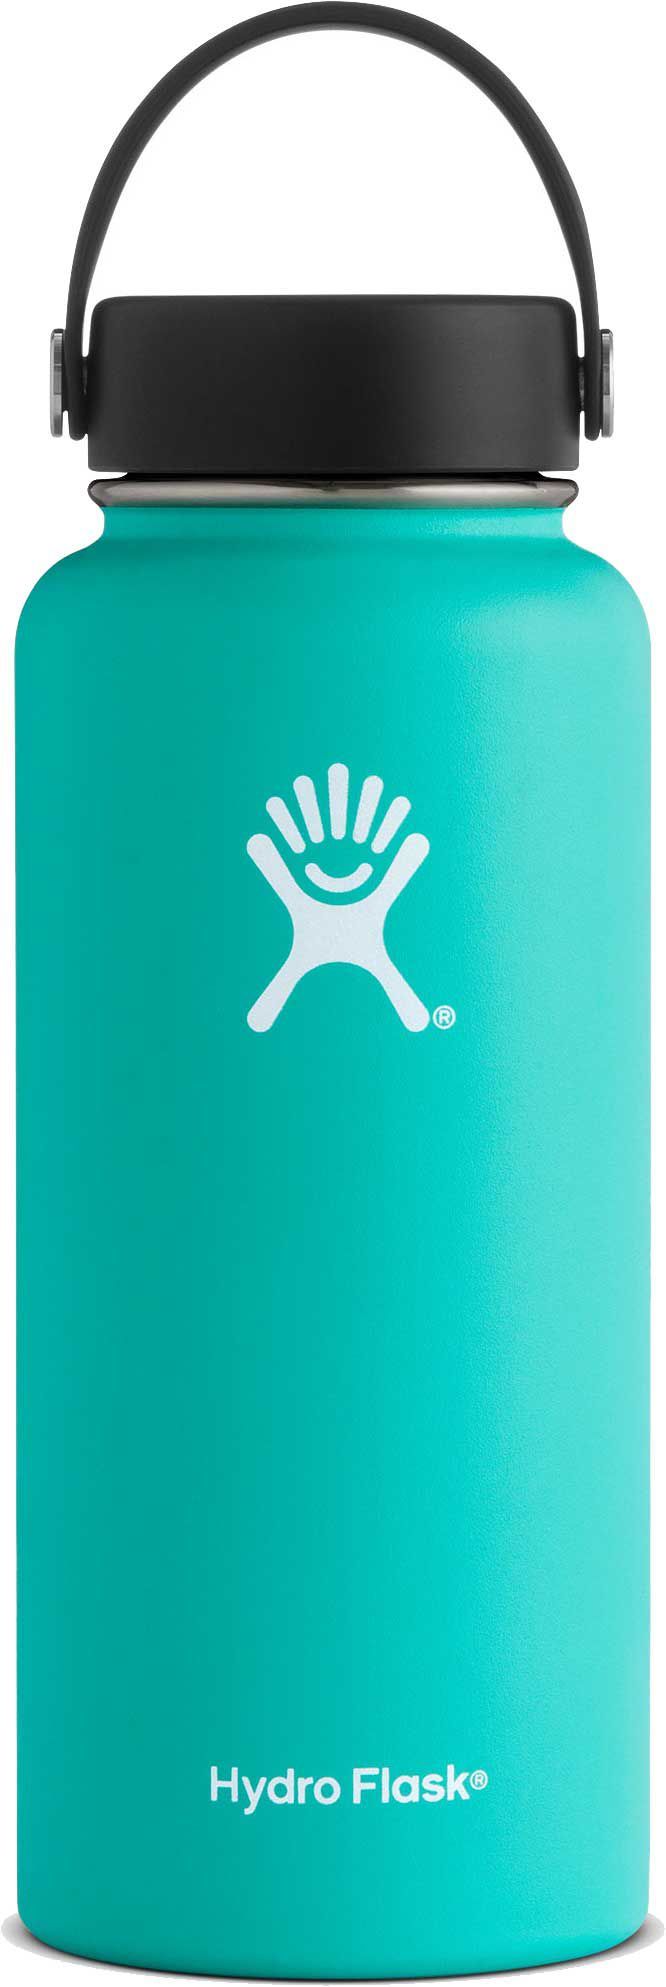 Hydro Flask Wide Mouth 32 oz. Bottle | Dick's Sporting Goods